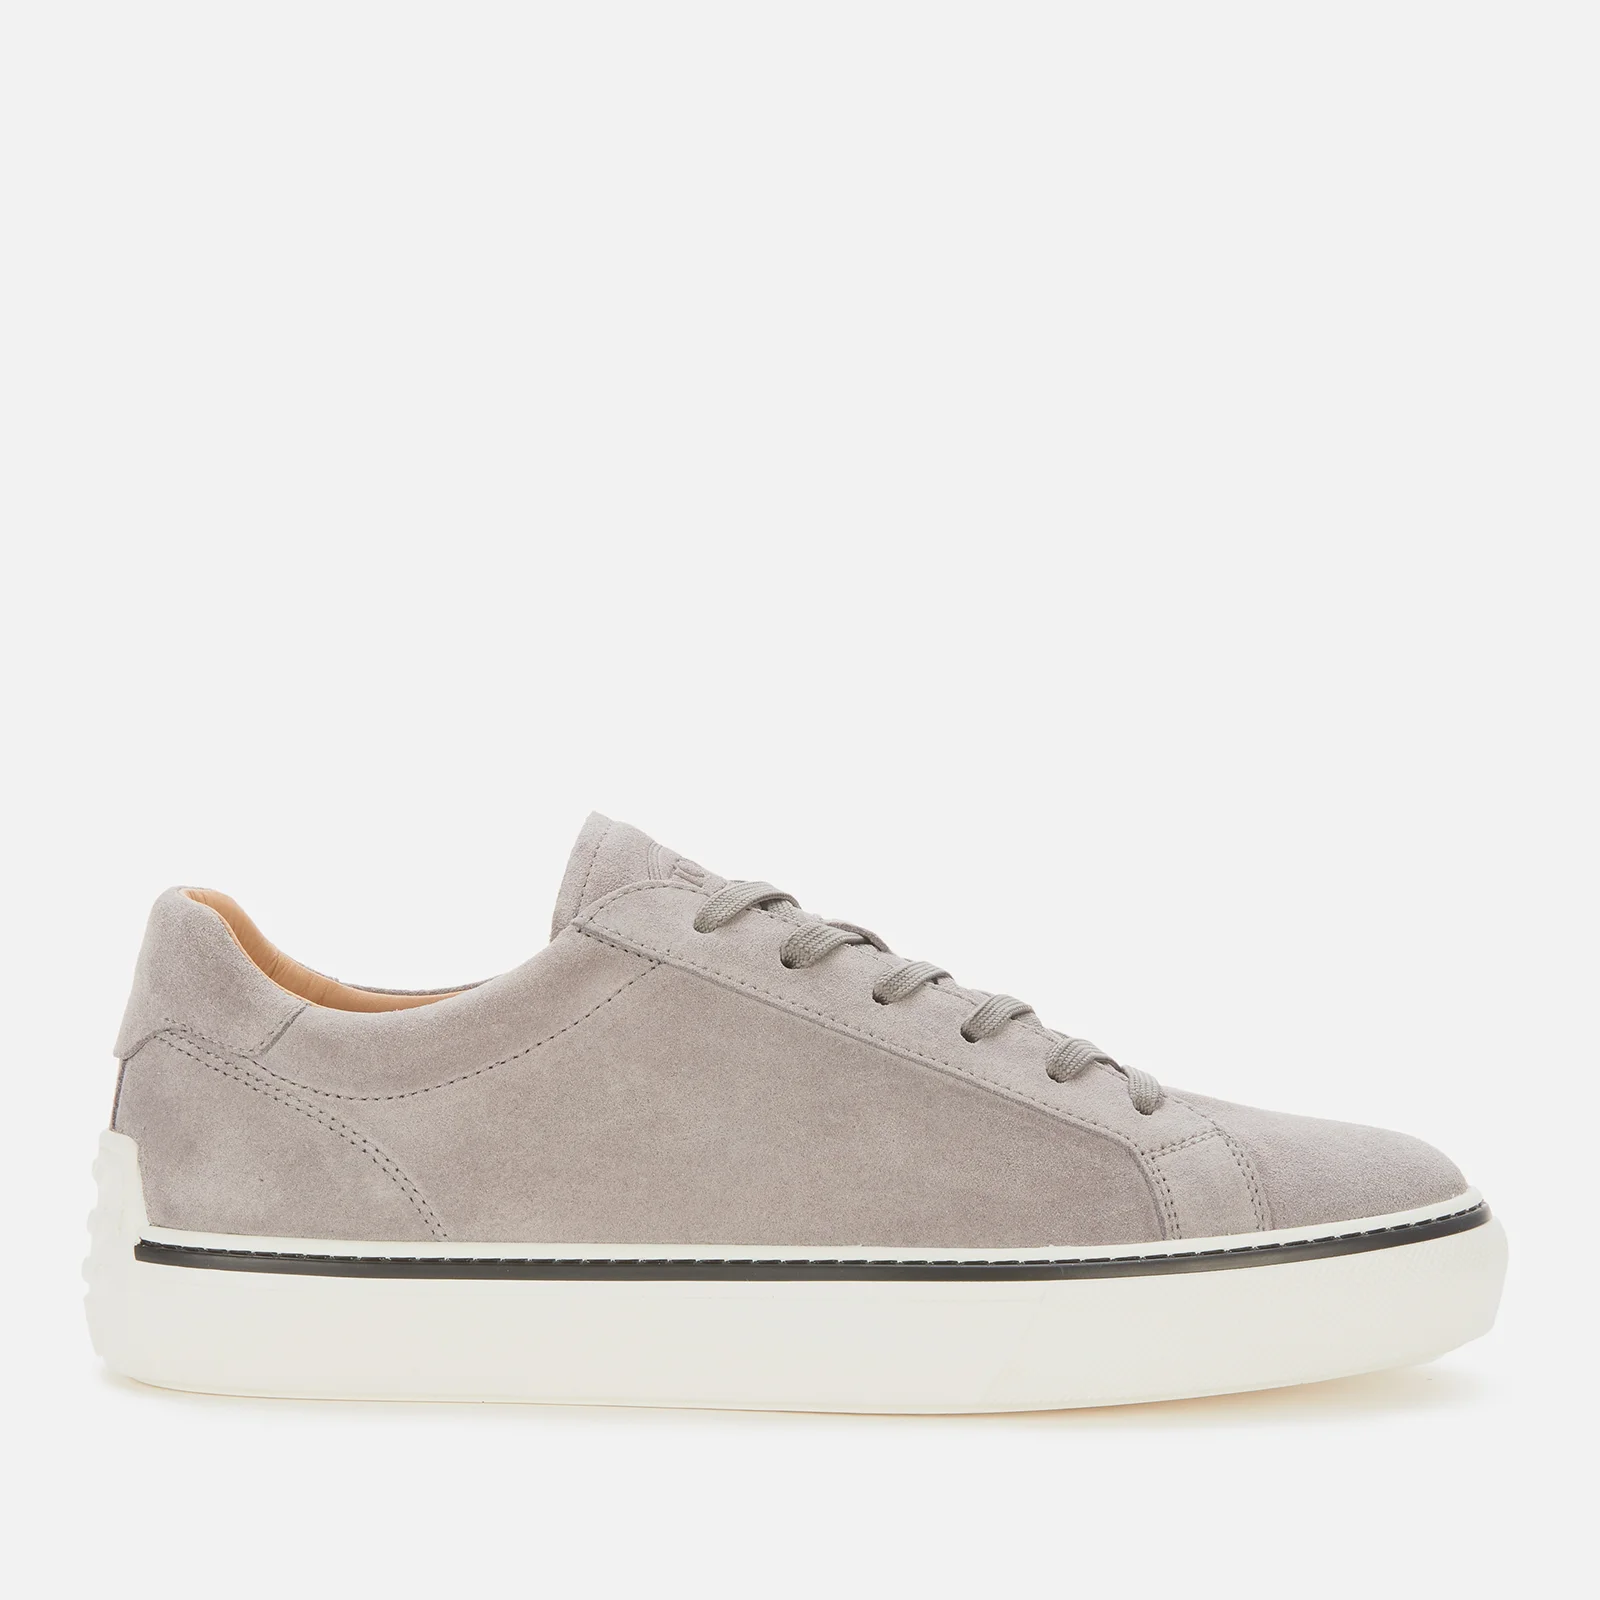 Tod's Men's Suede Low Top Trainers - Grey Image 1